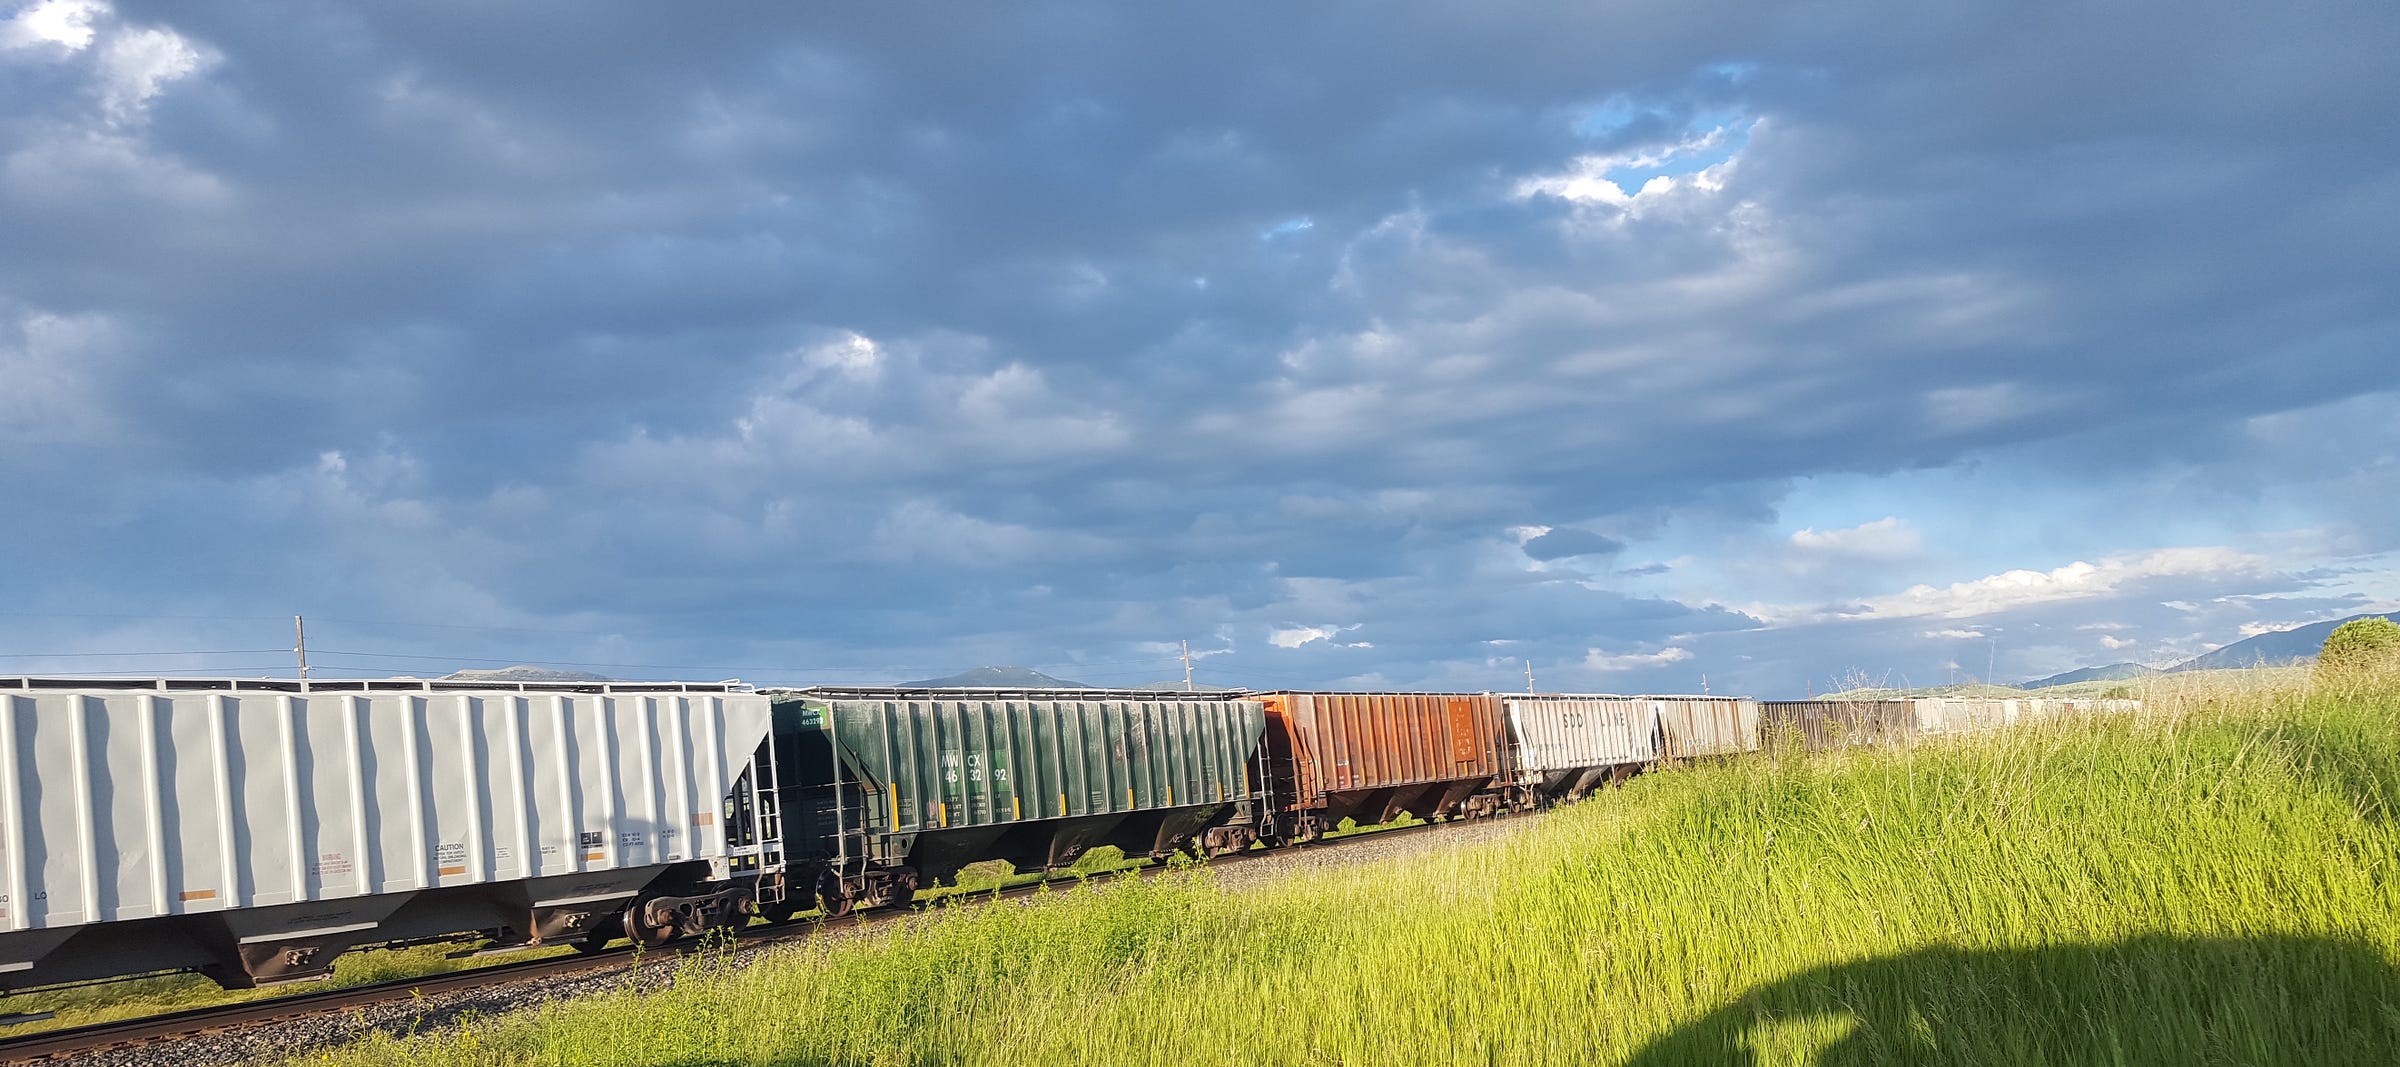 A freight train with colorful cars -- white, green, orange, brown, goes by a grassy area under a cloud-filled sky.